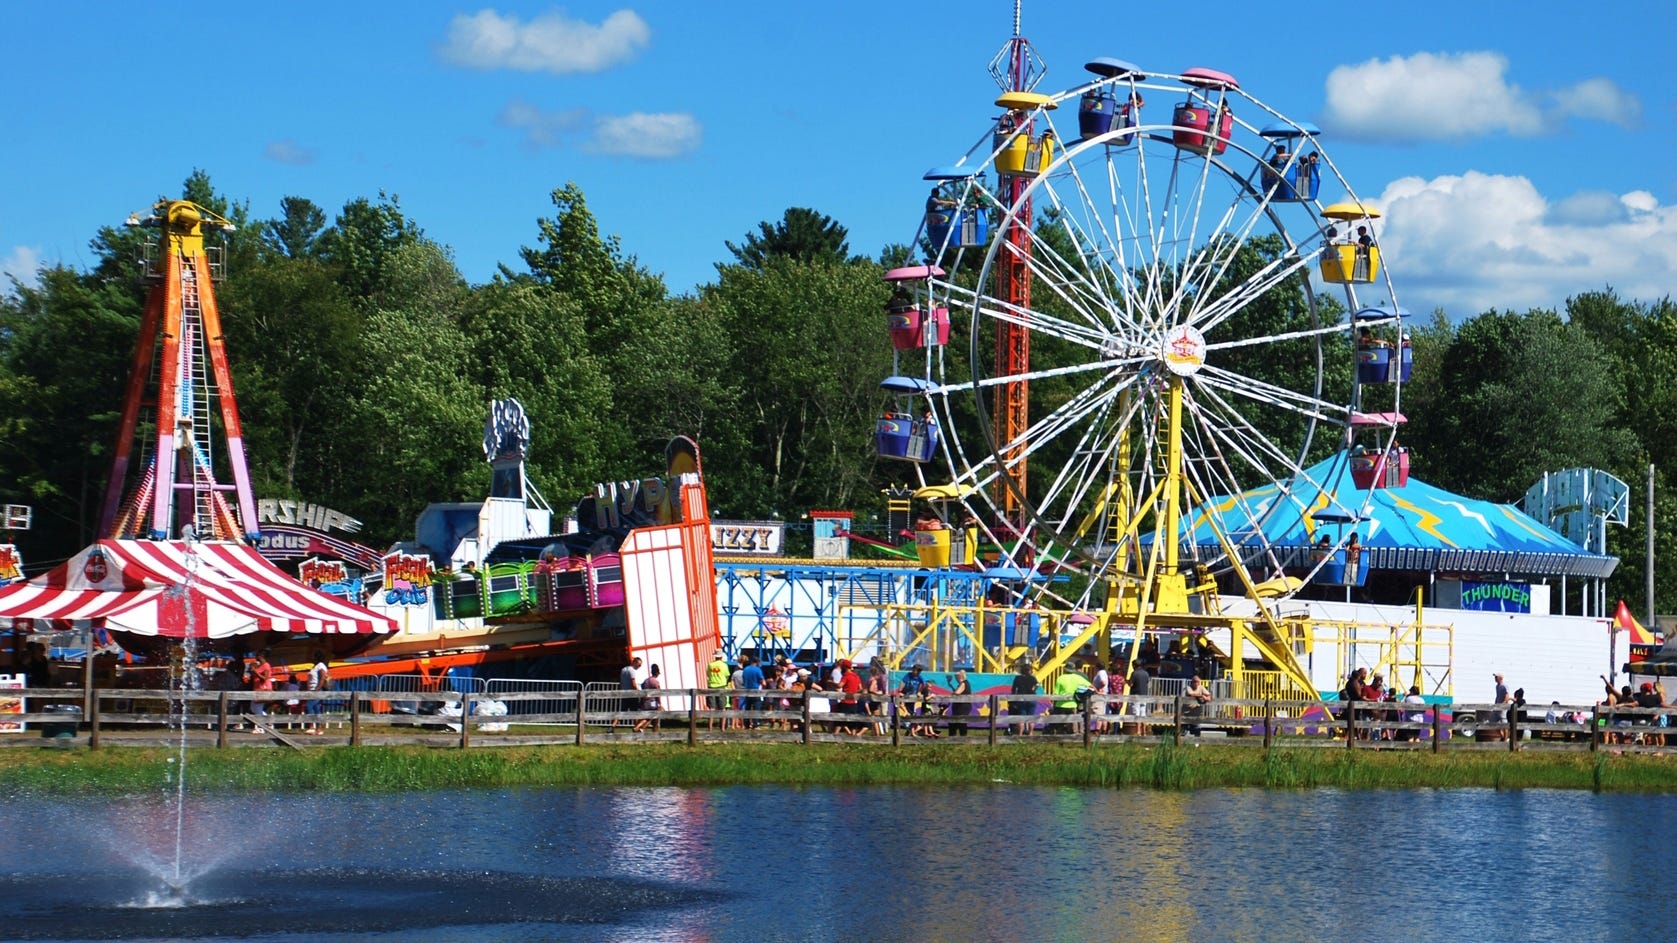 Bolton Fair returns after COVID19 pandemic pause; change in parking